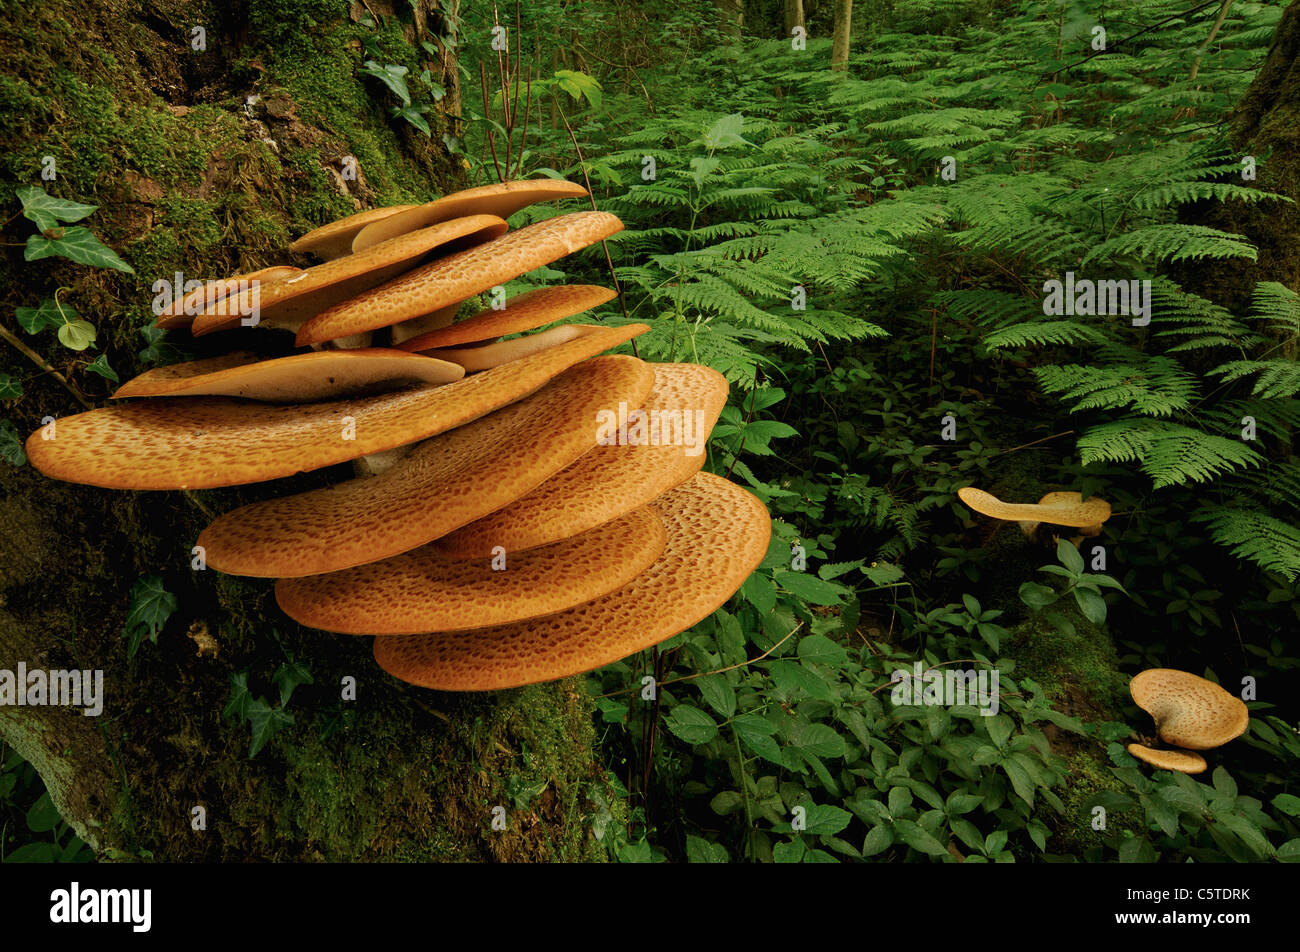 DRYAD'S SADDLE Polyporus squamosus Exceptional example of this polypore fungus growing in a deciduous woodland.  Derbyshire, UK Stock Photo